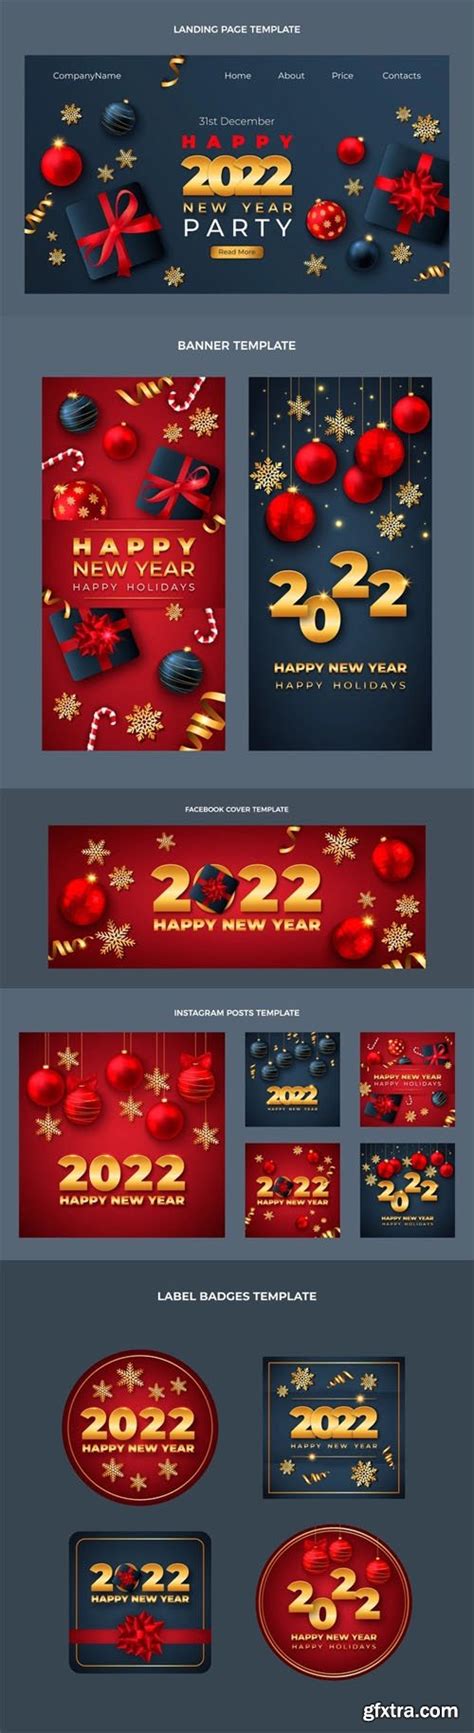 Realistic Happy New Year 2022 Vector Templates Collection Gfxtra